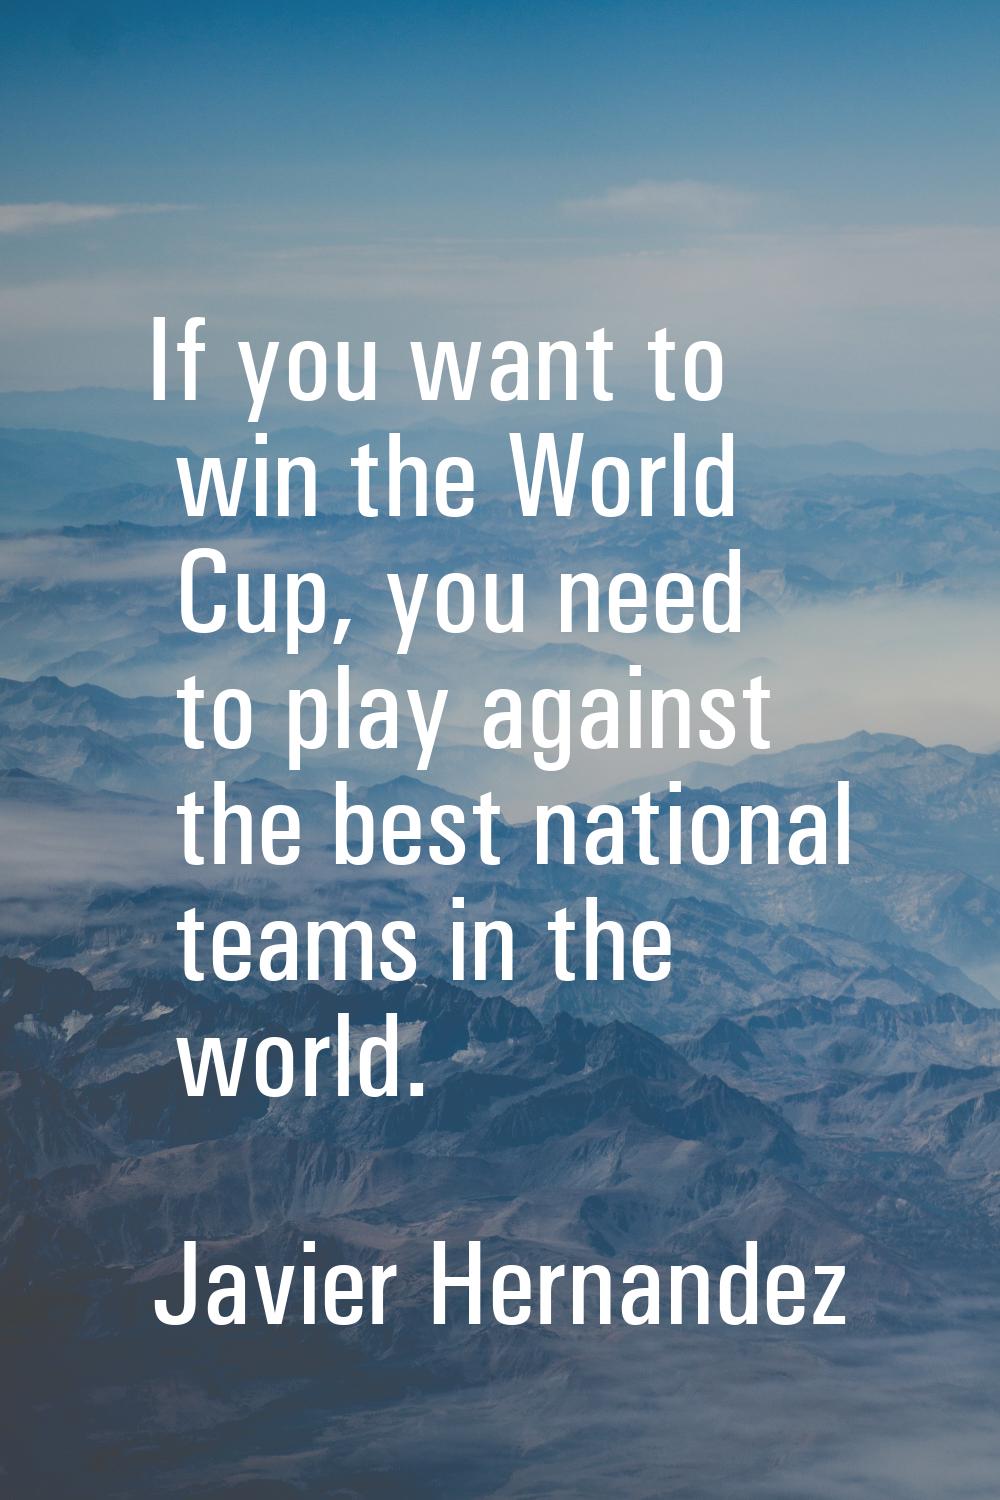 If you want to win the World Cup, you need to play against the best national teams in the world.